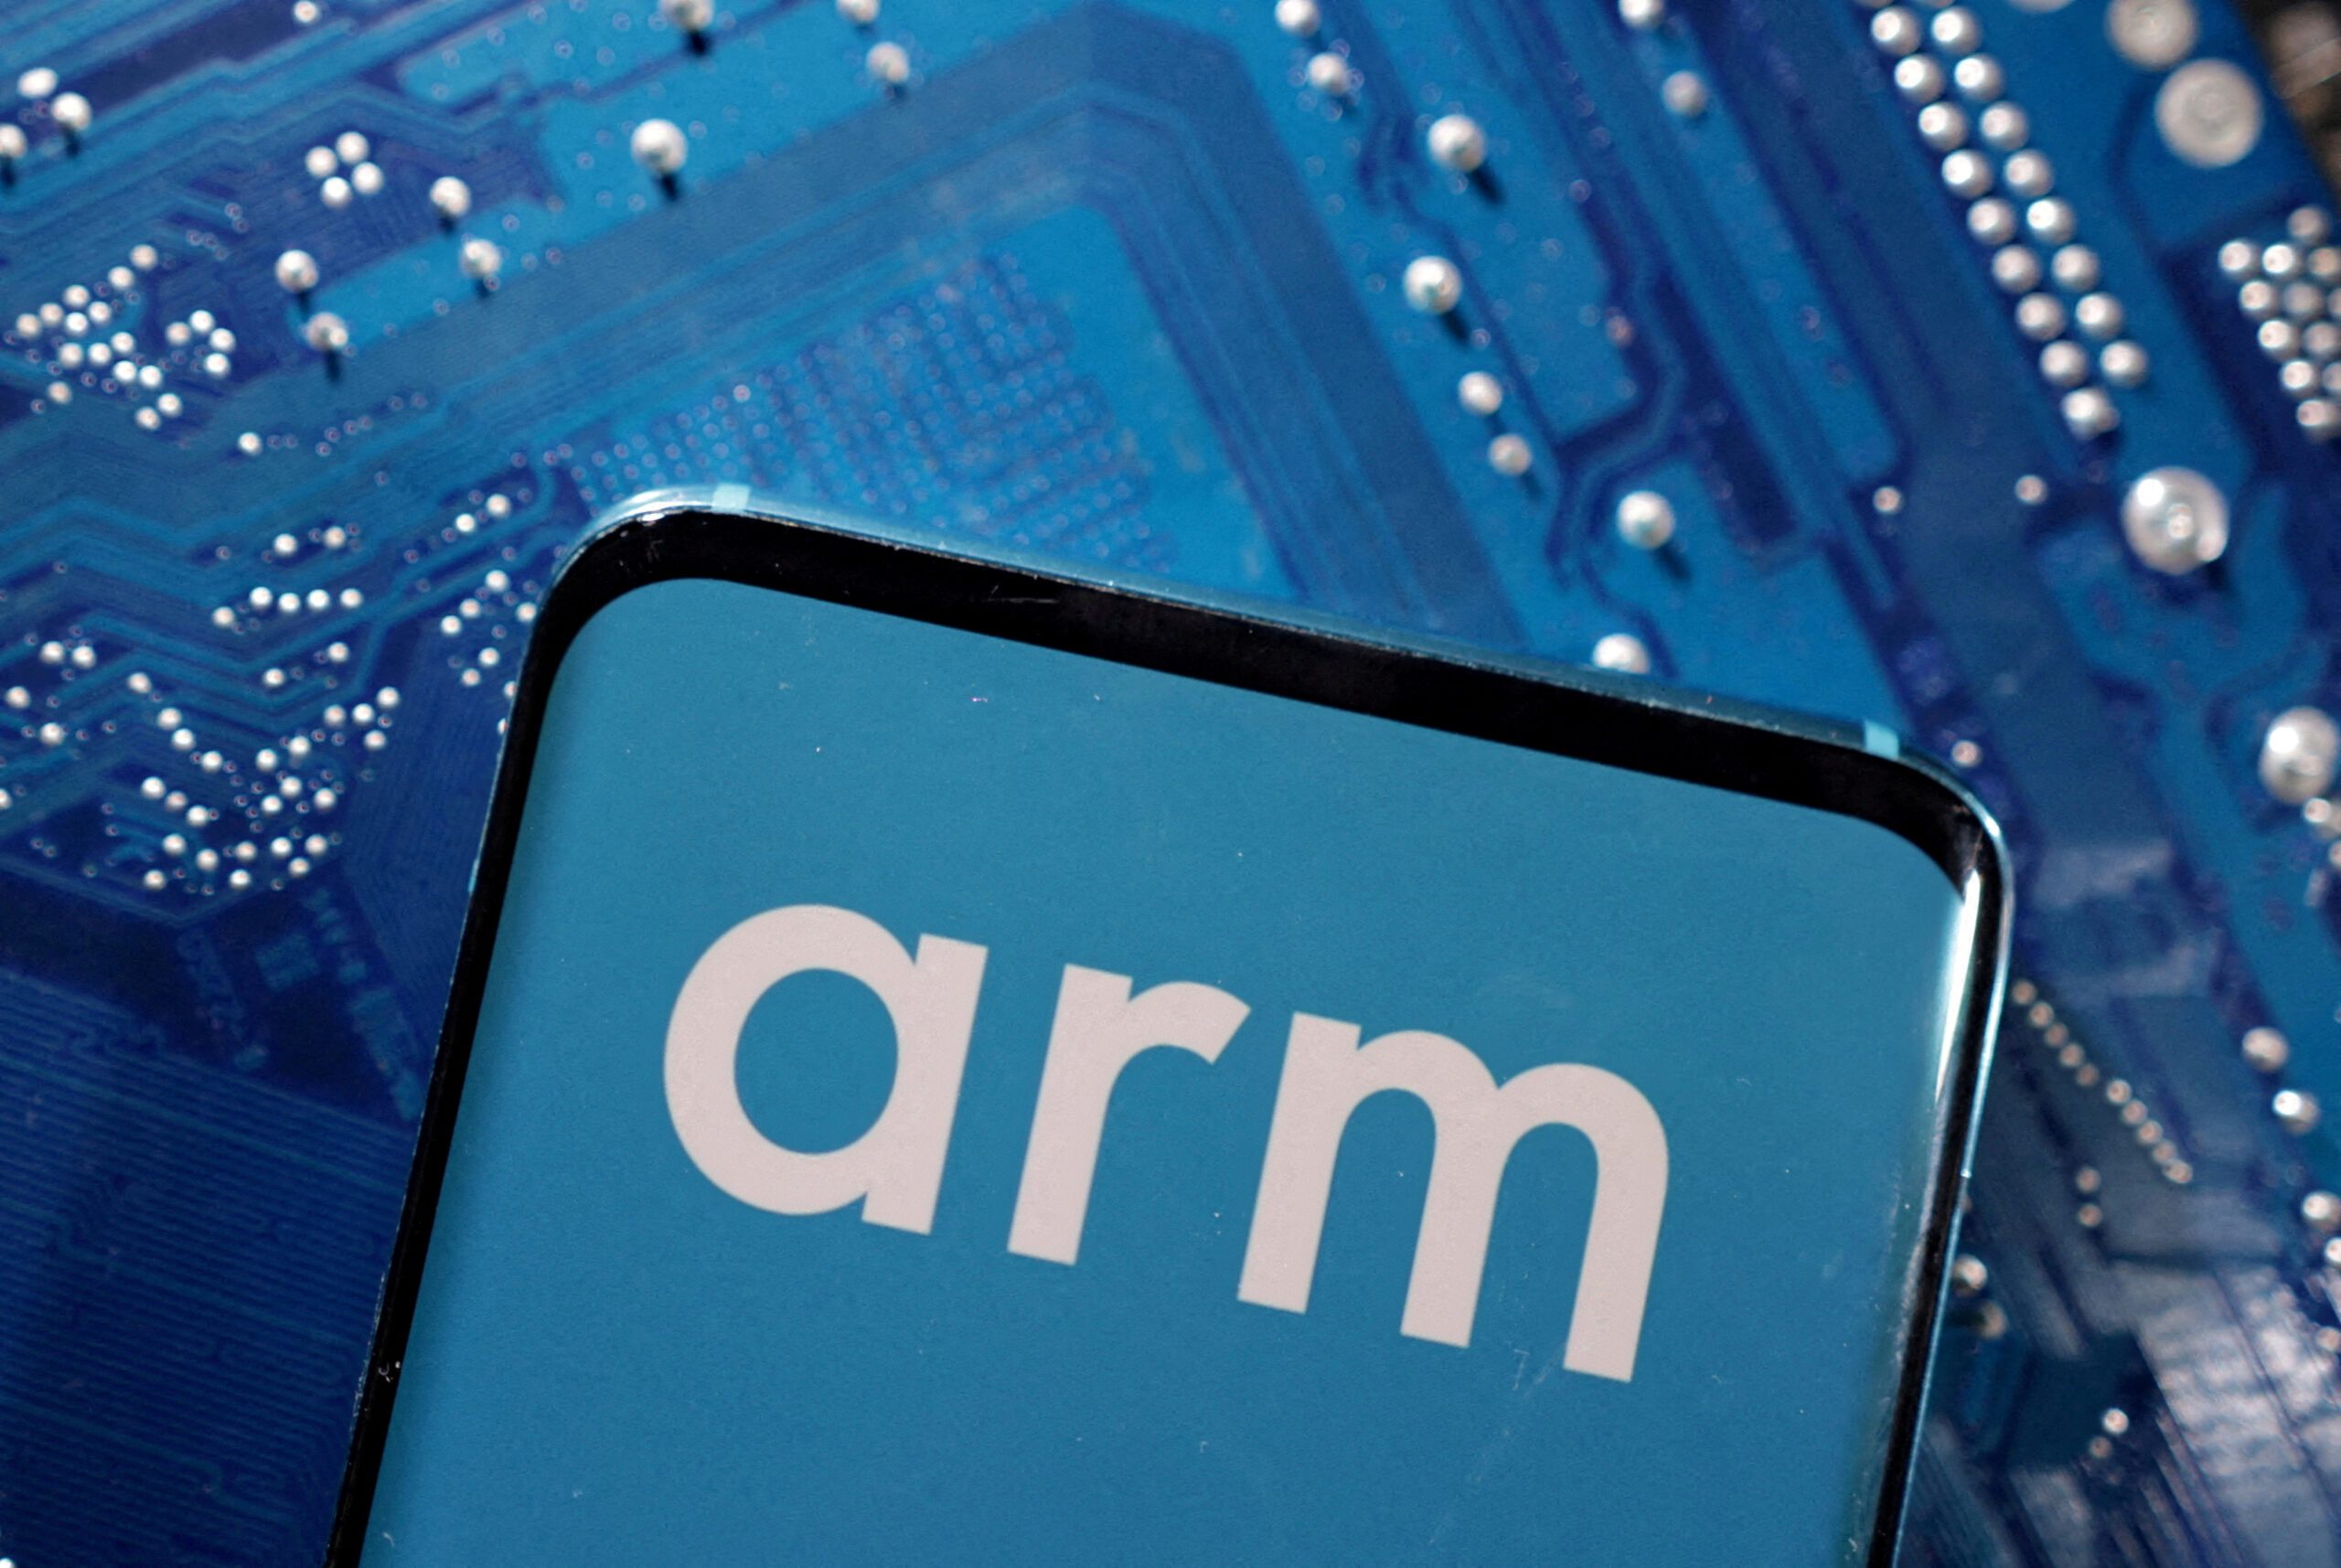 Arm's stellar listing paves the way for more SoftBank acquisitions